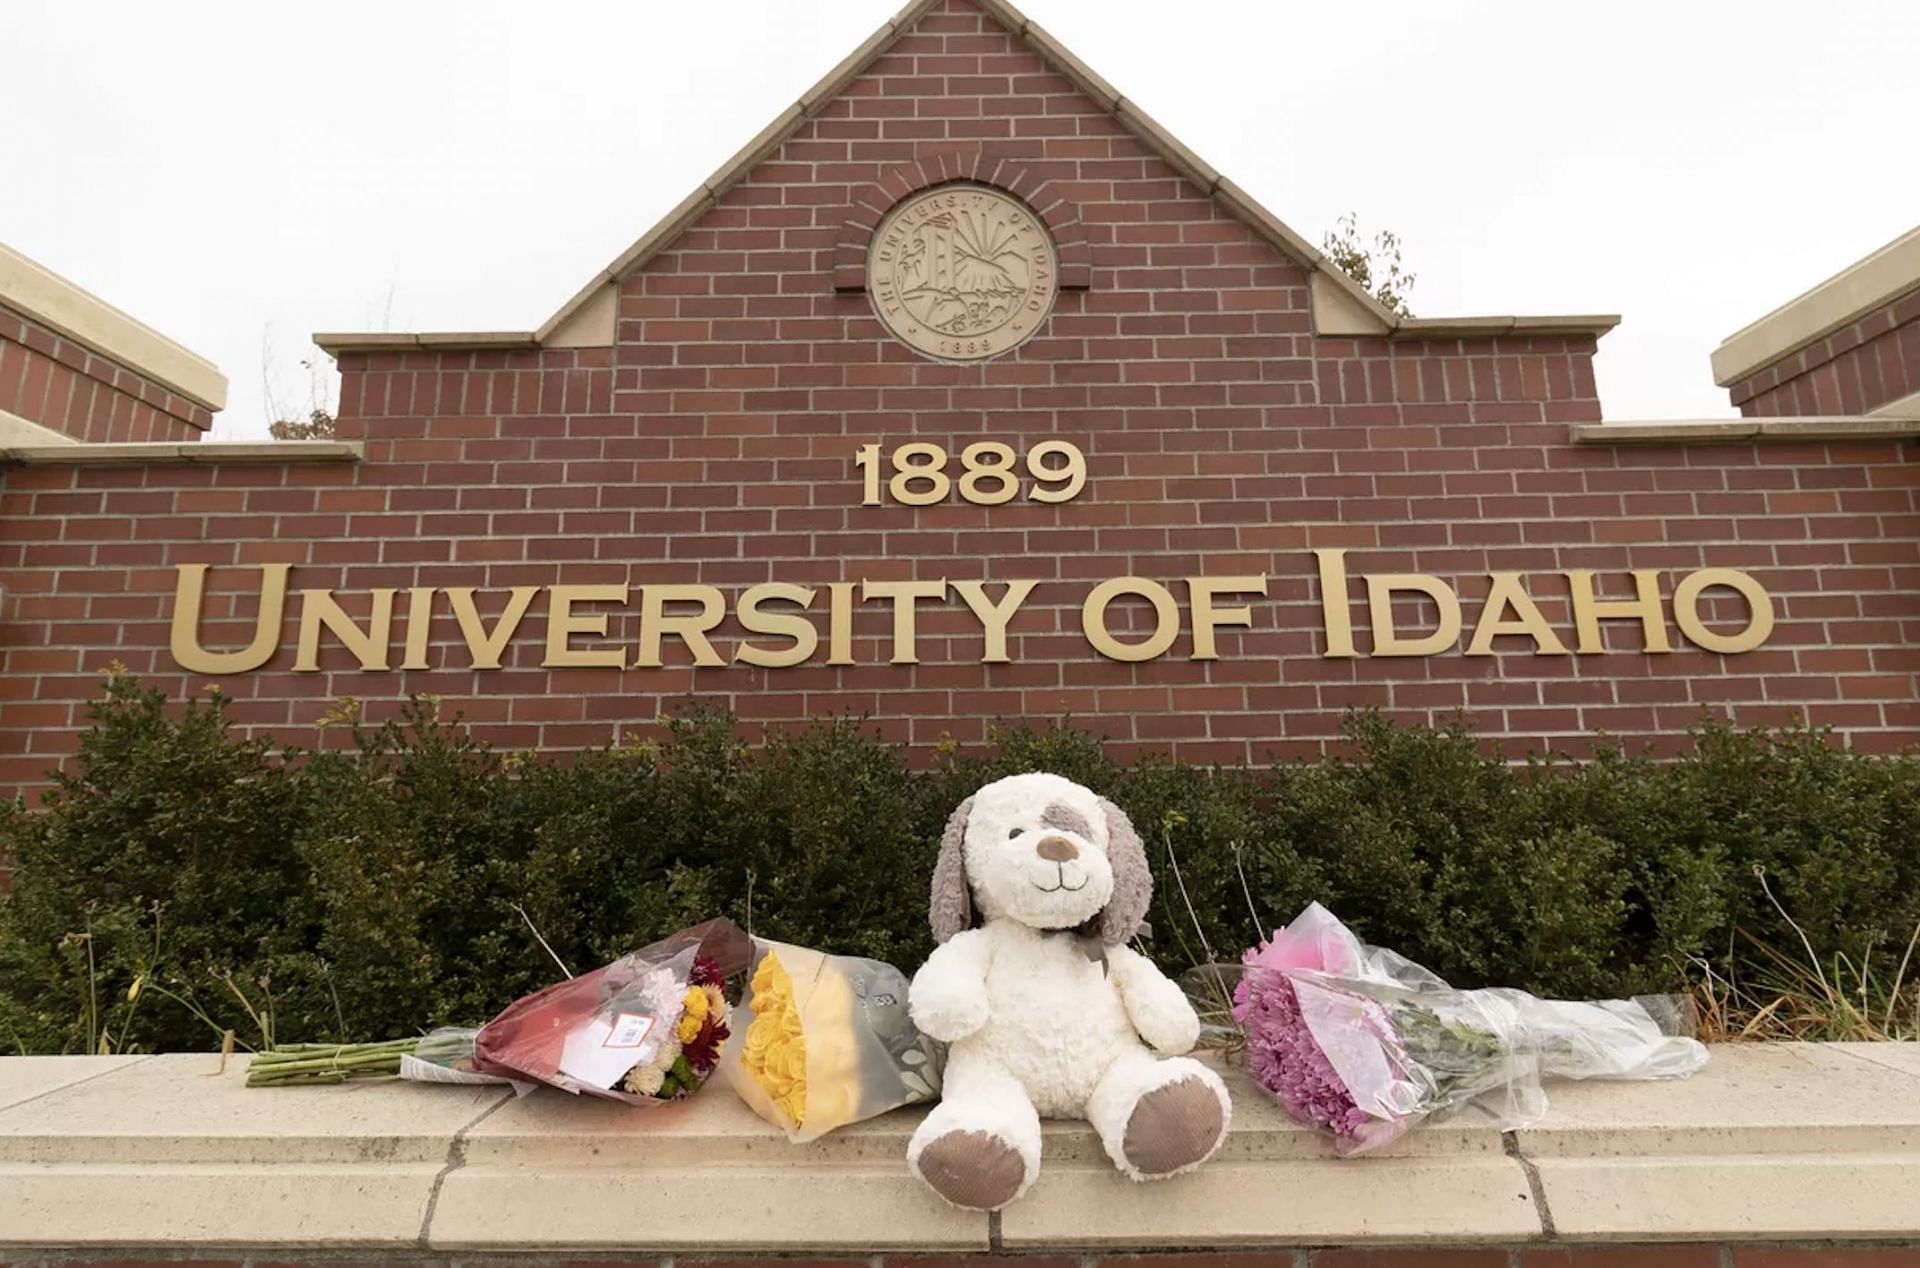 University of Idaho students found dead in suspected homicide named